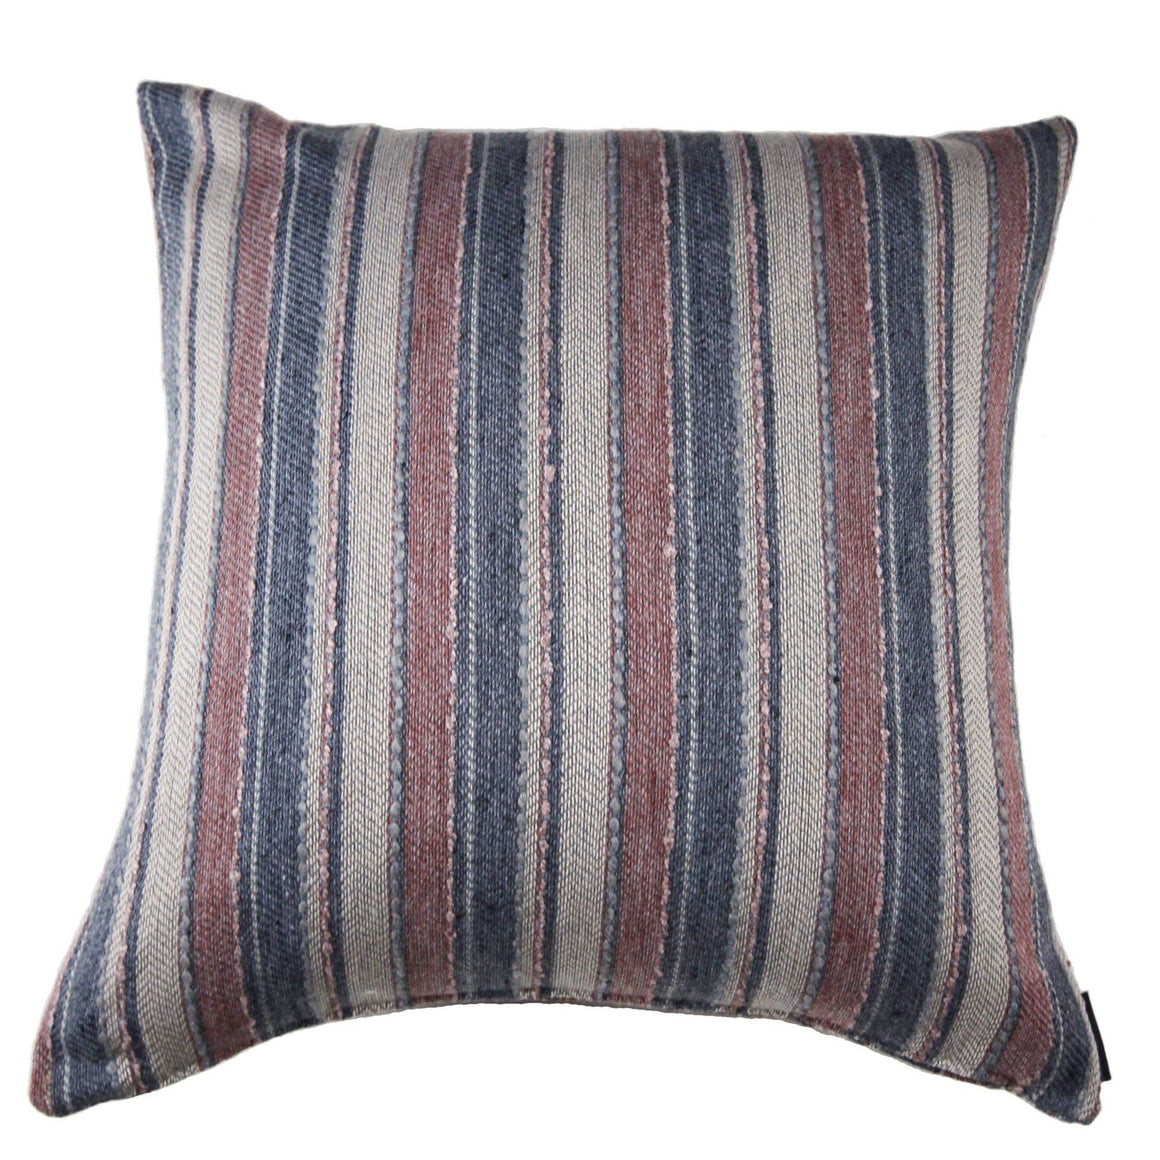 Sandra - Striped Blue, Grey and Pink Pillow Cover - 24x24